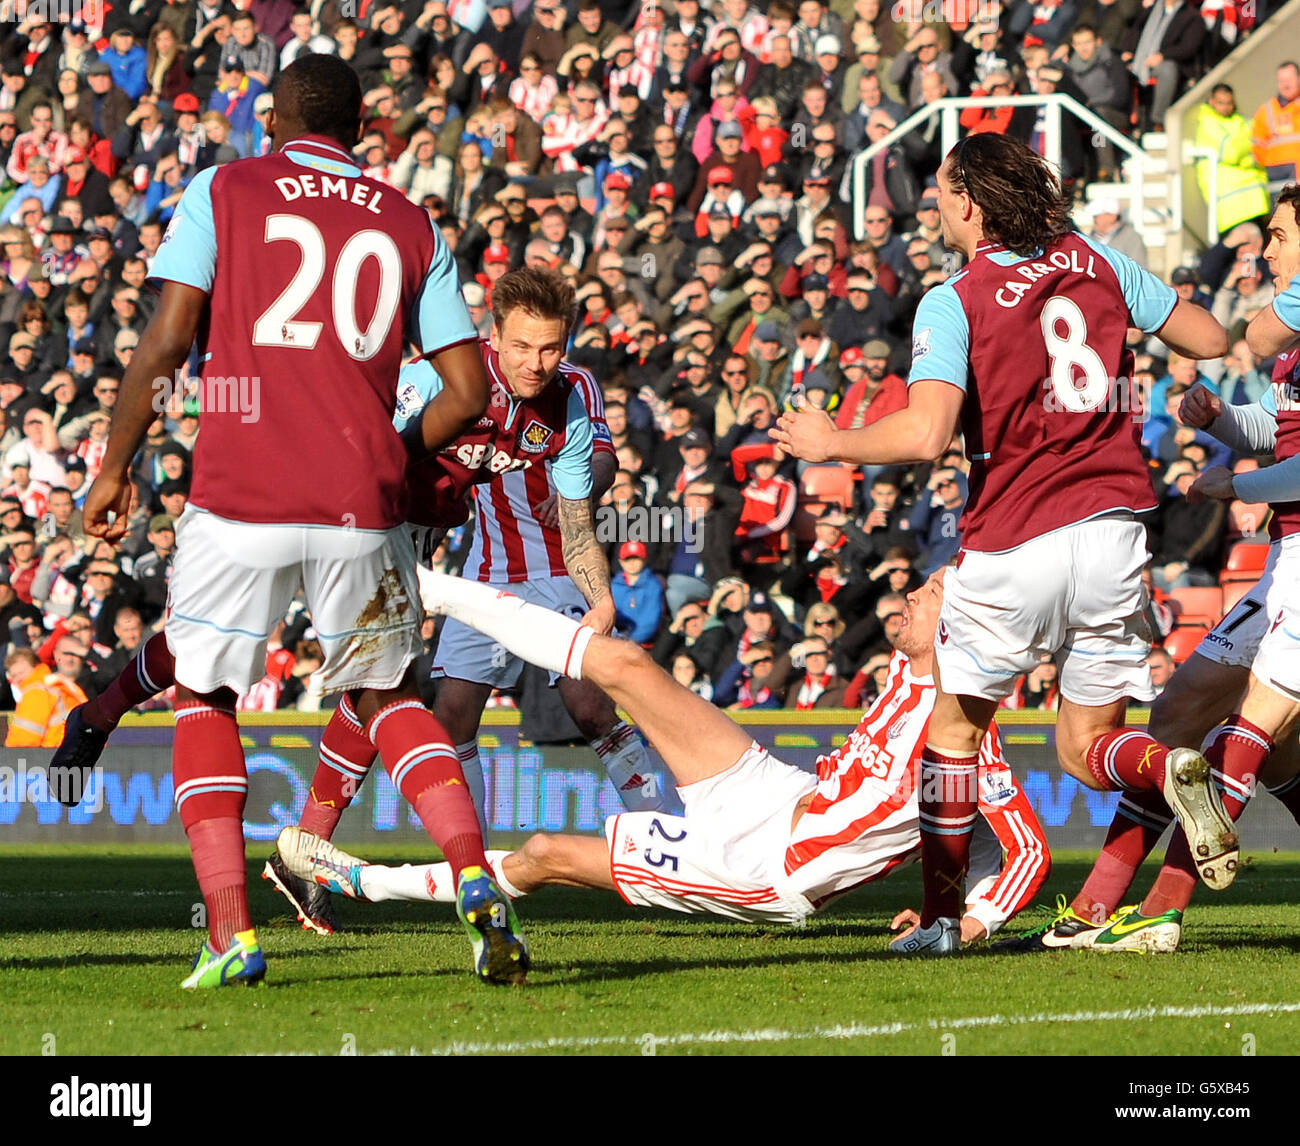 Stoke City's Peter Crouch tries an overhead kick but floors West Ham United's Matthew Taylor during the Barclays Premier League match at the Britannia Stadium, Stoke. Stock Photo